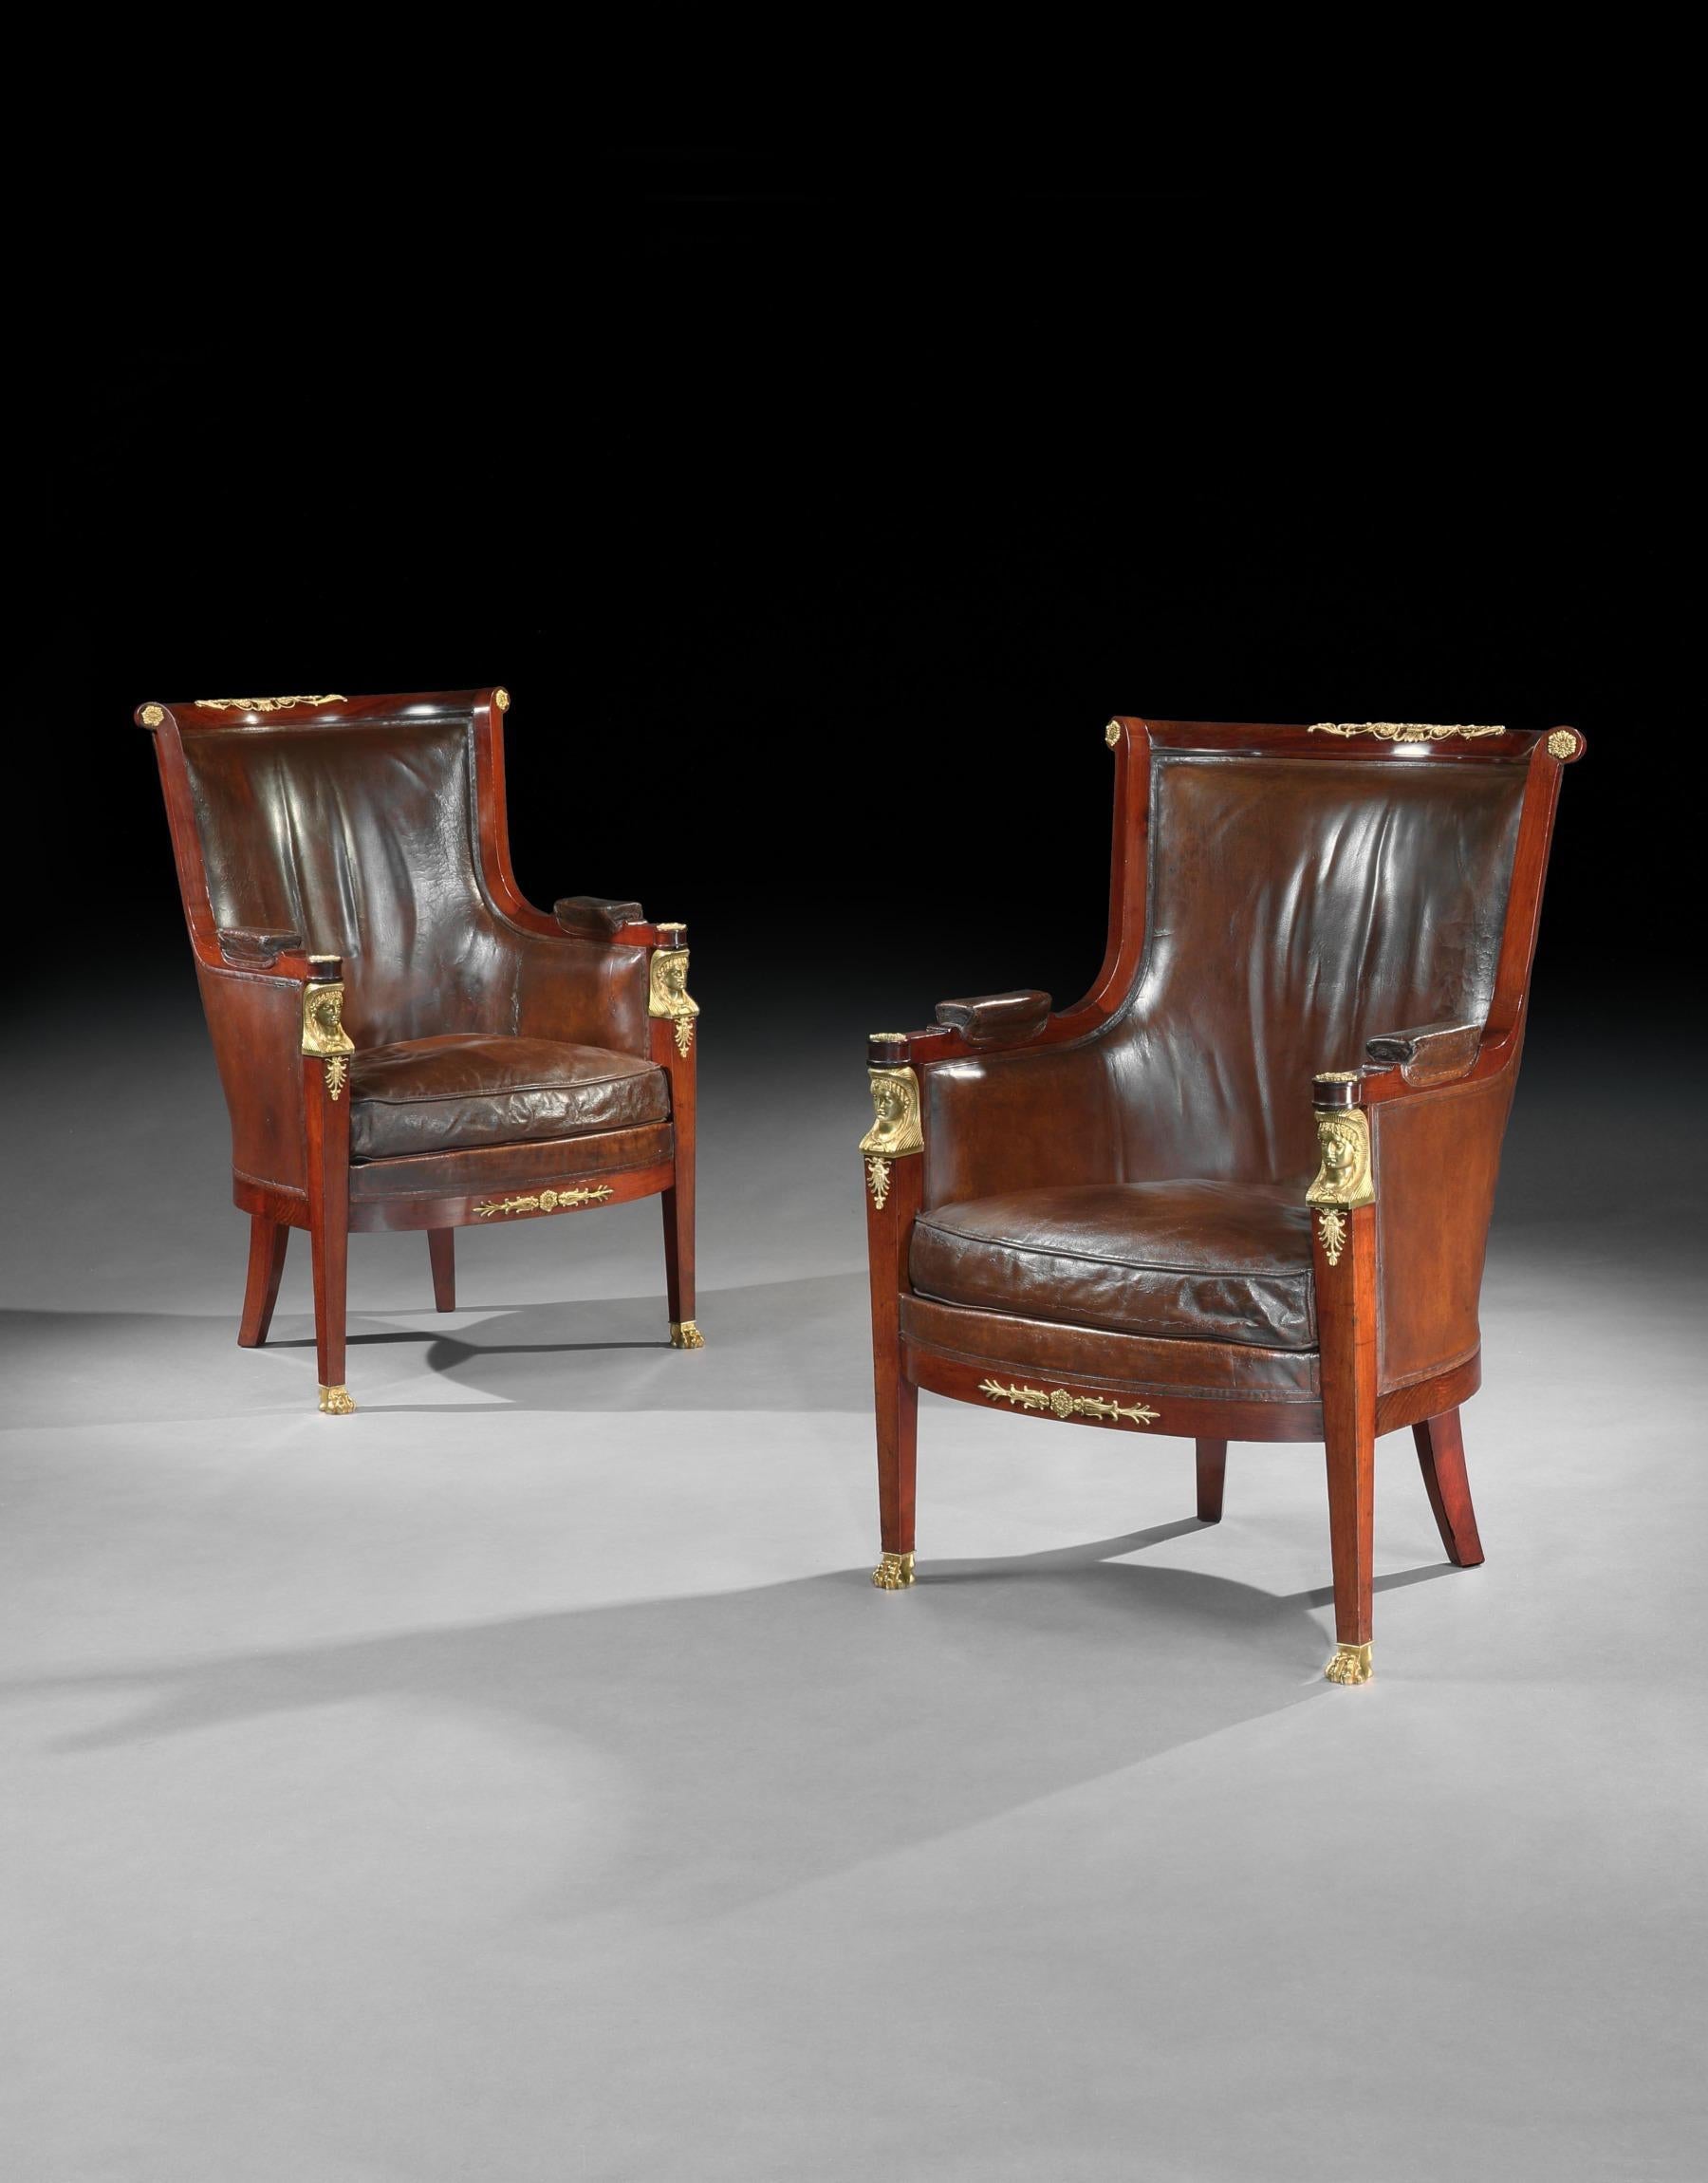 A very fine pair of late 19th century French Empire style mahogany library bergeres, gilt bronze mounted retaining the original Moroccan leather upholstery, attributed to Maison Lalande.

French, circa 1890-1900.

The curved top-rails with